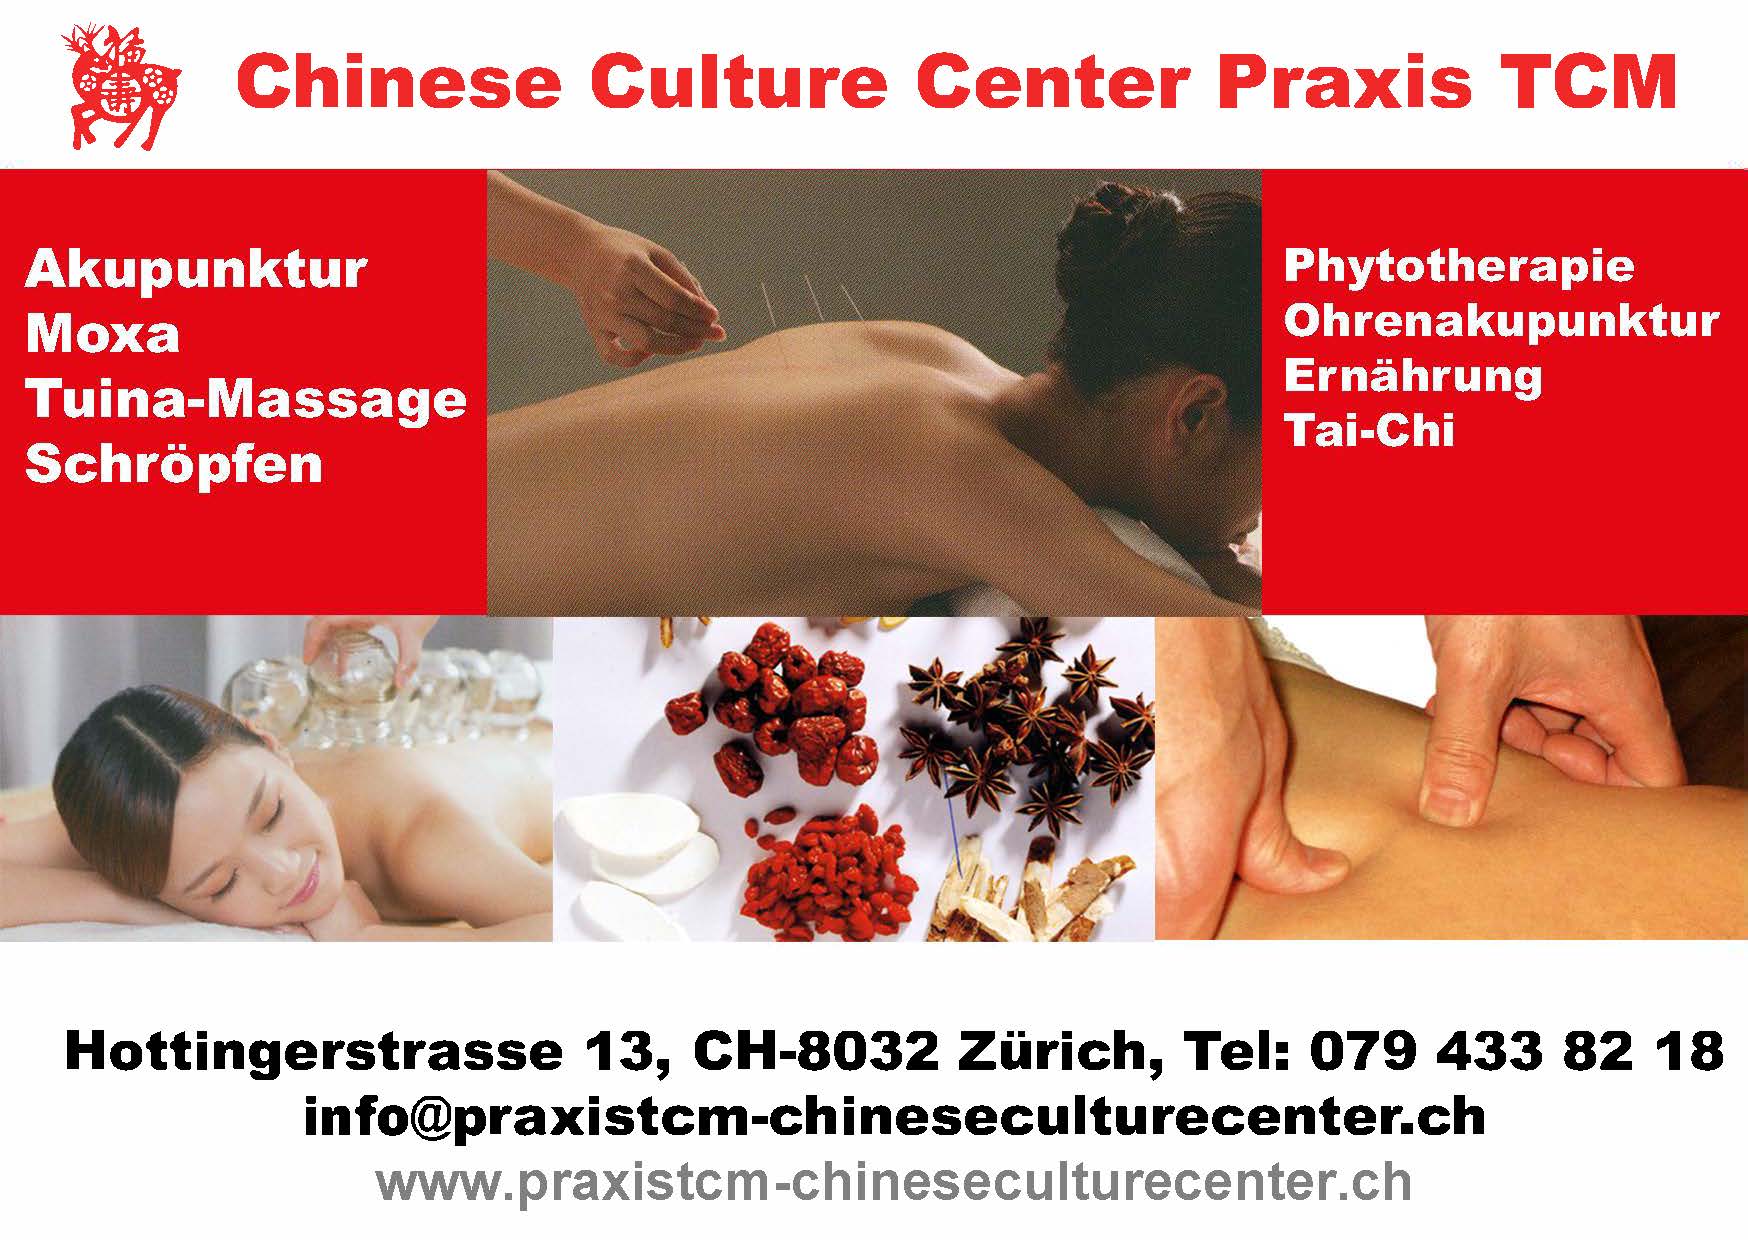 Chinese Culter Center Praxis TCM - Jianguo Ma